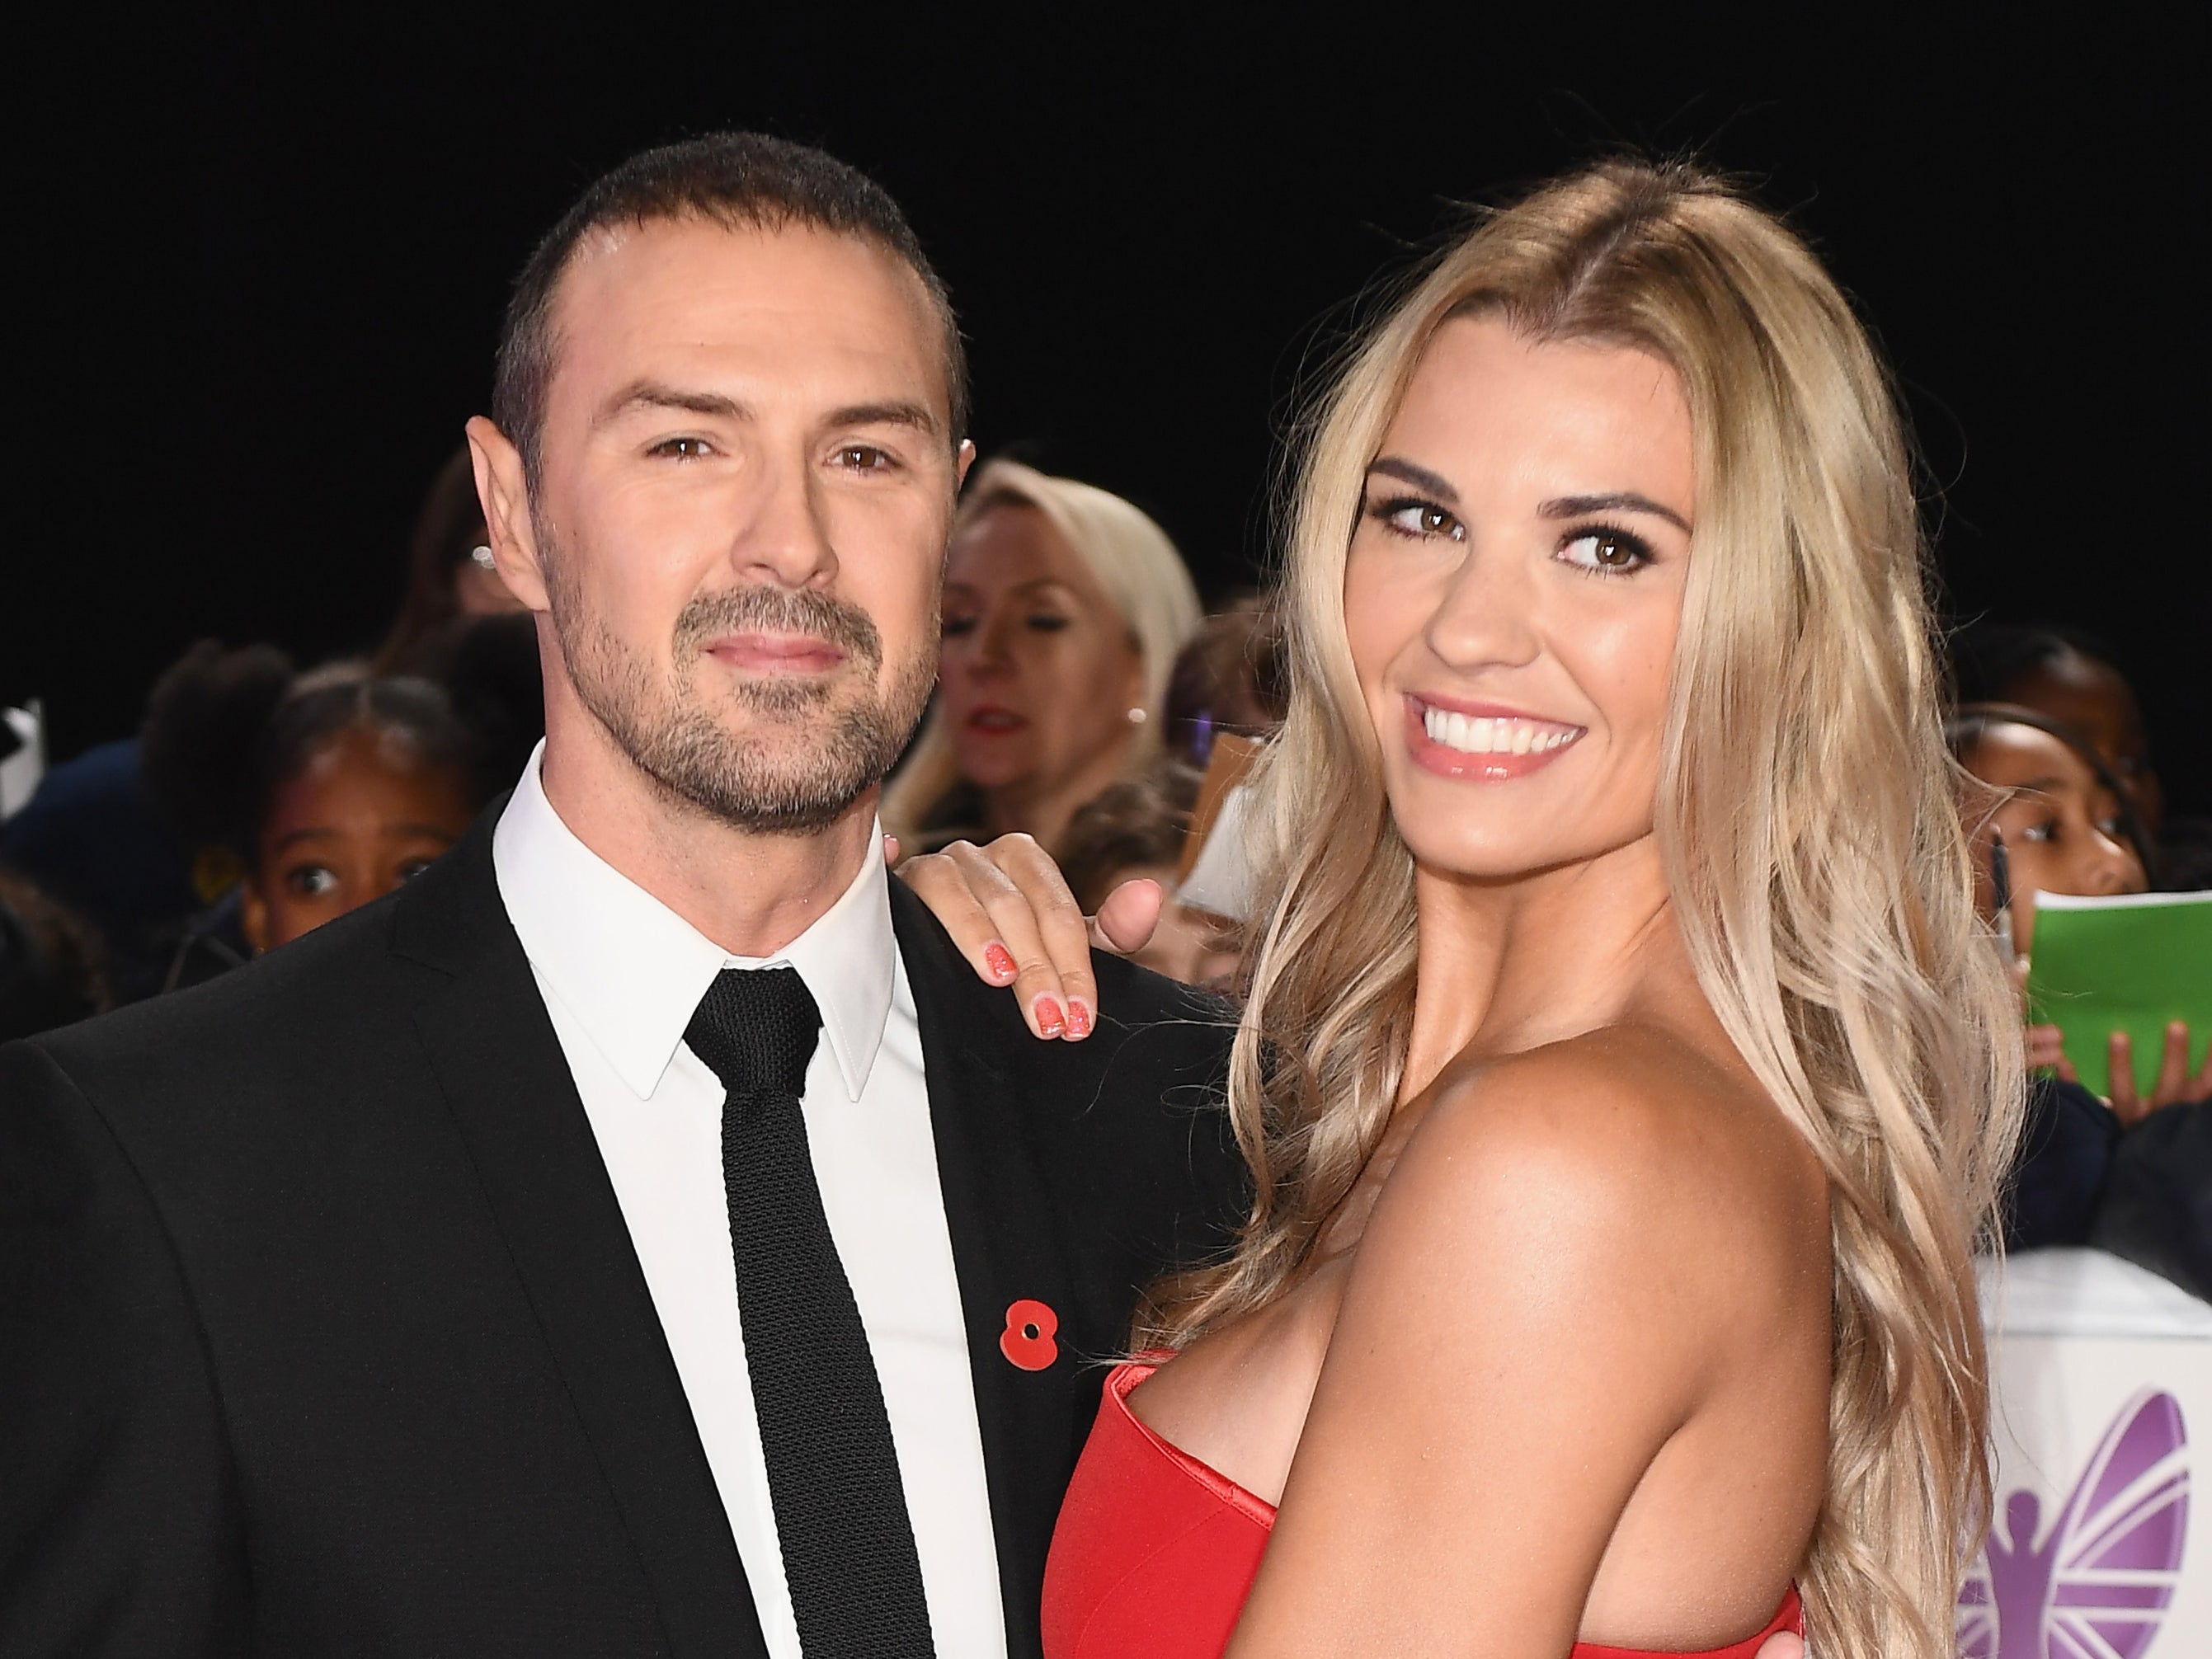 Paddy and Christine McGuinness